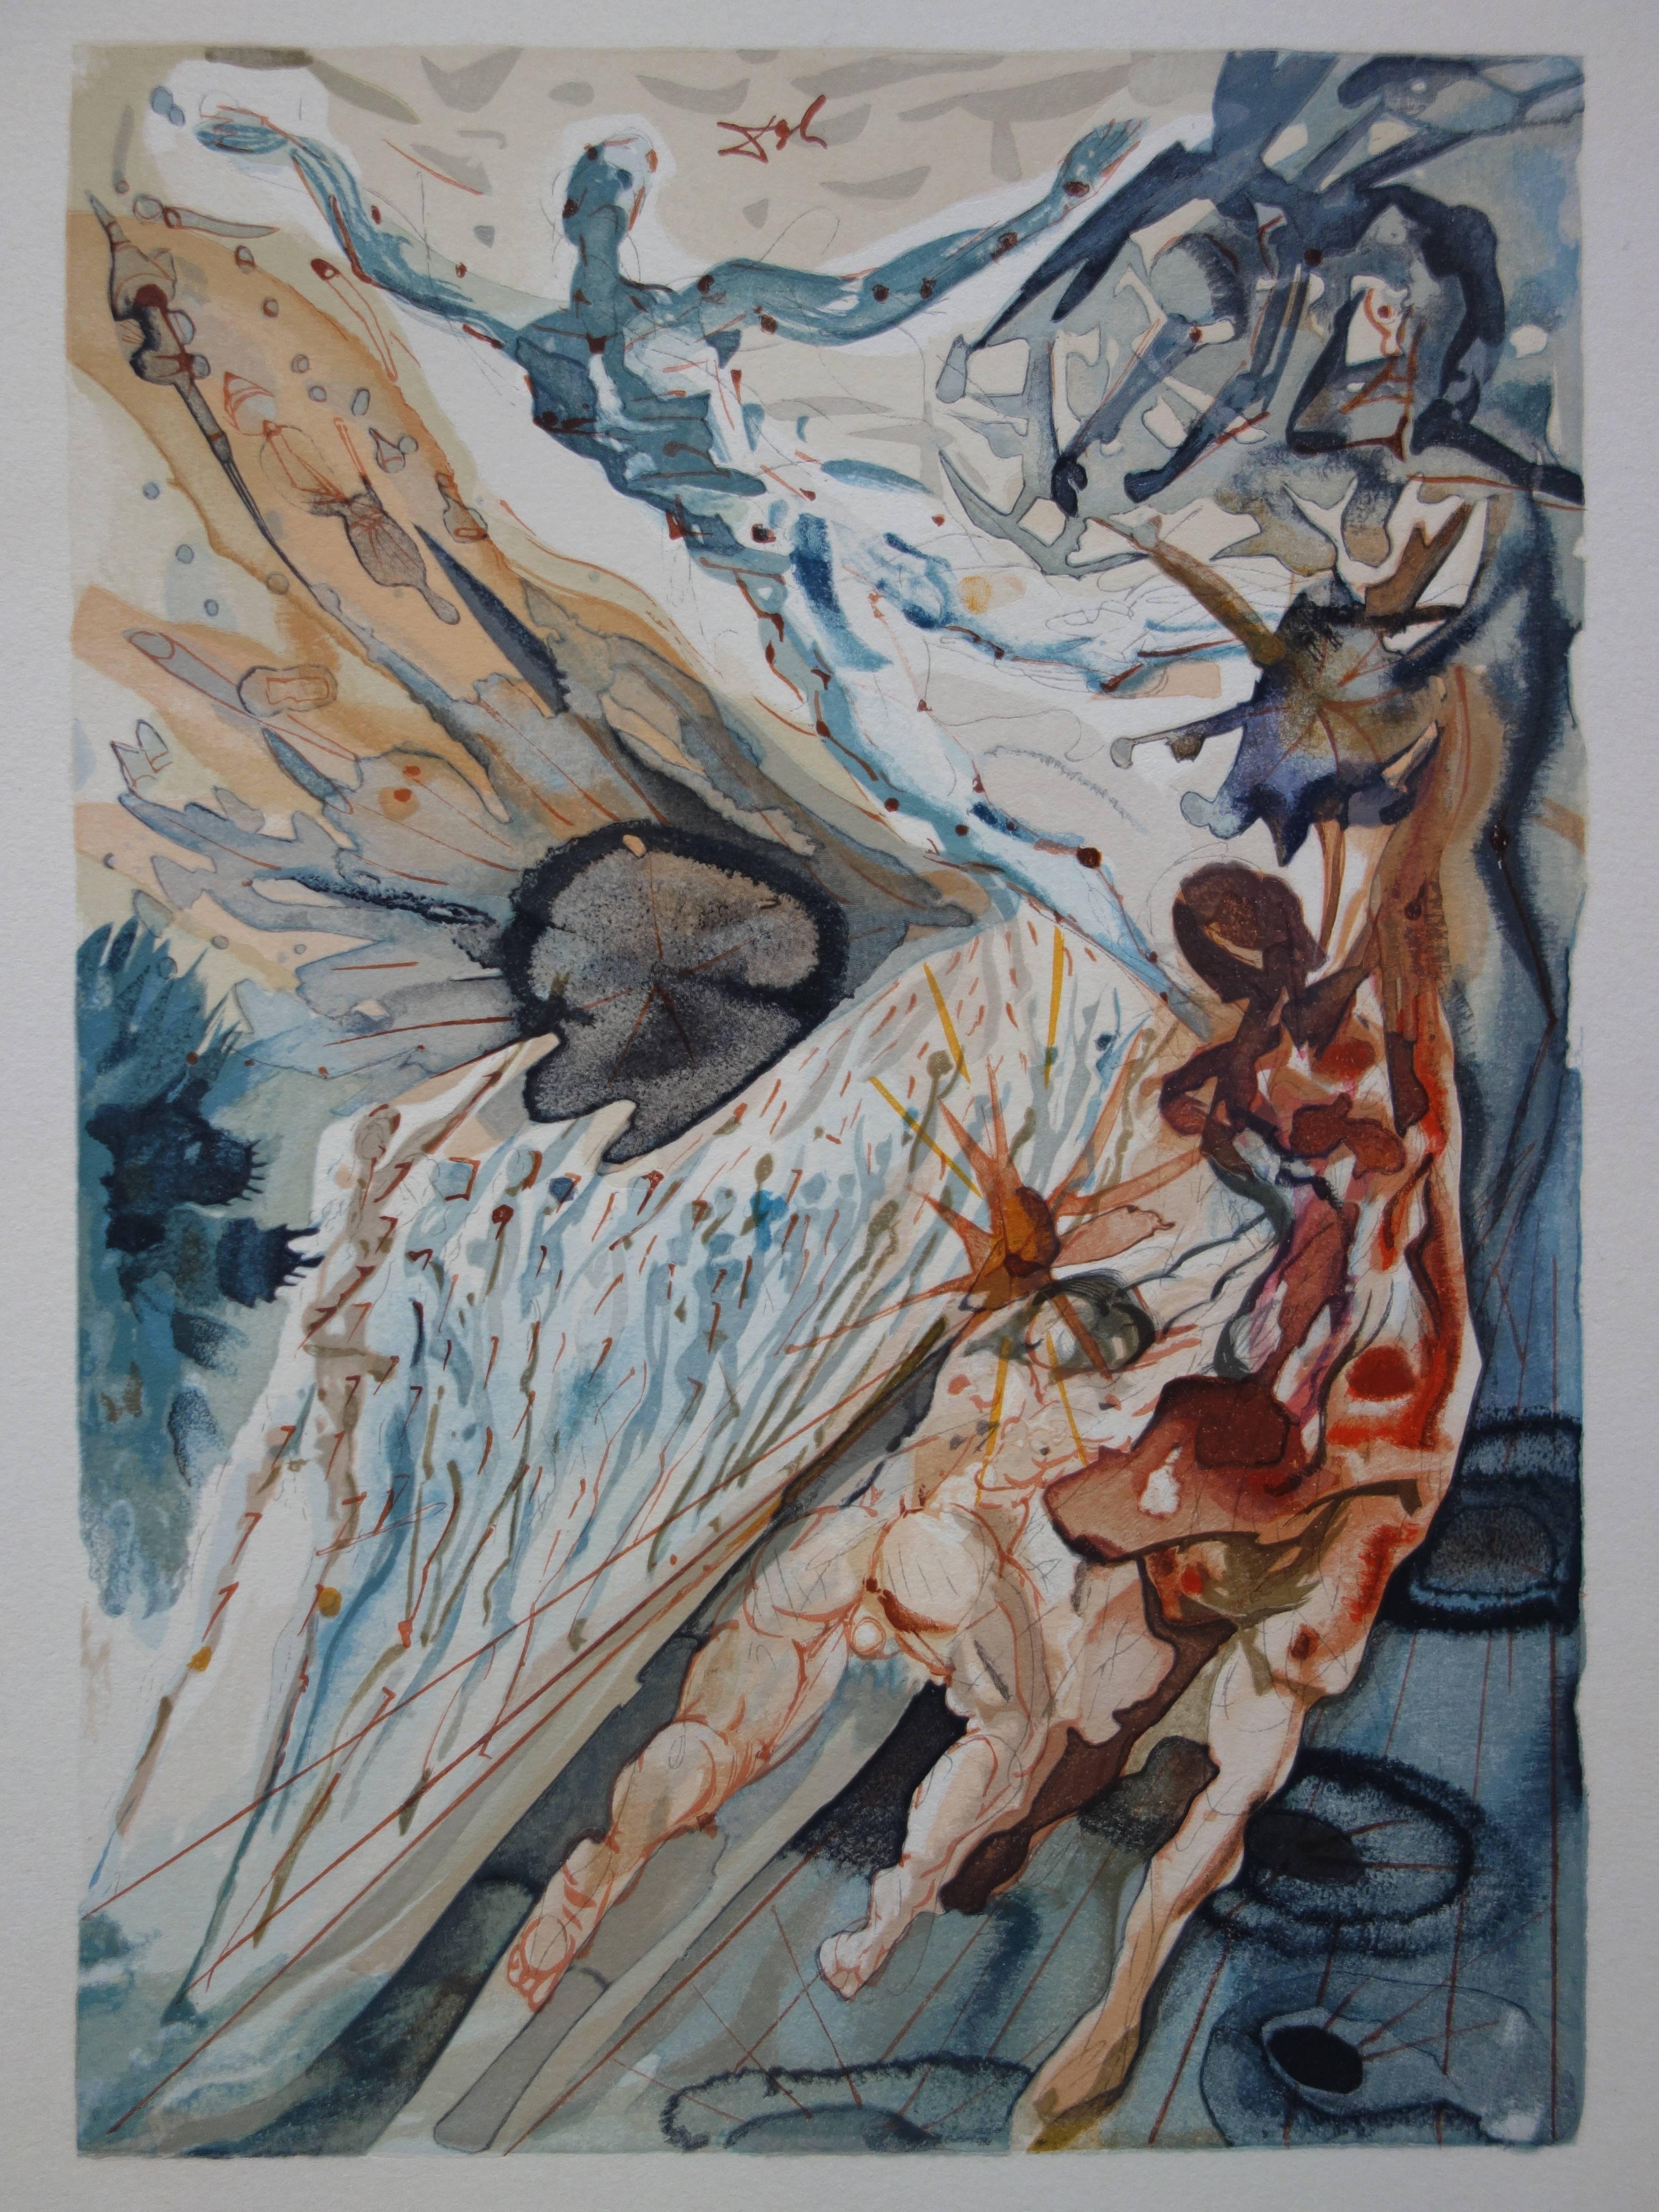 Purgatory 26 - Encounter with Two Groups of the Lusty - Color woodcut (Surrealismus), Print, von Salvador Dalí